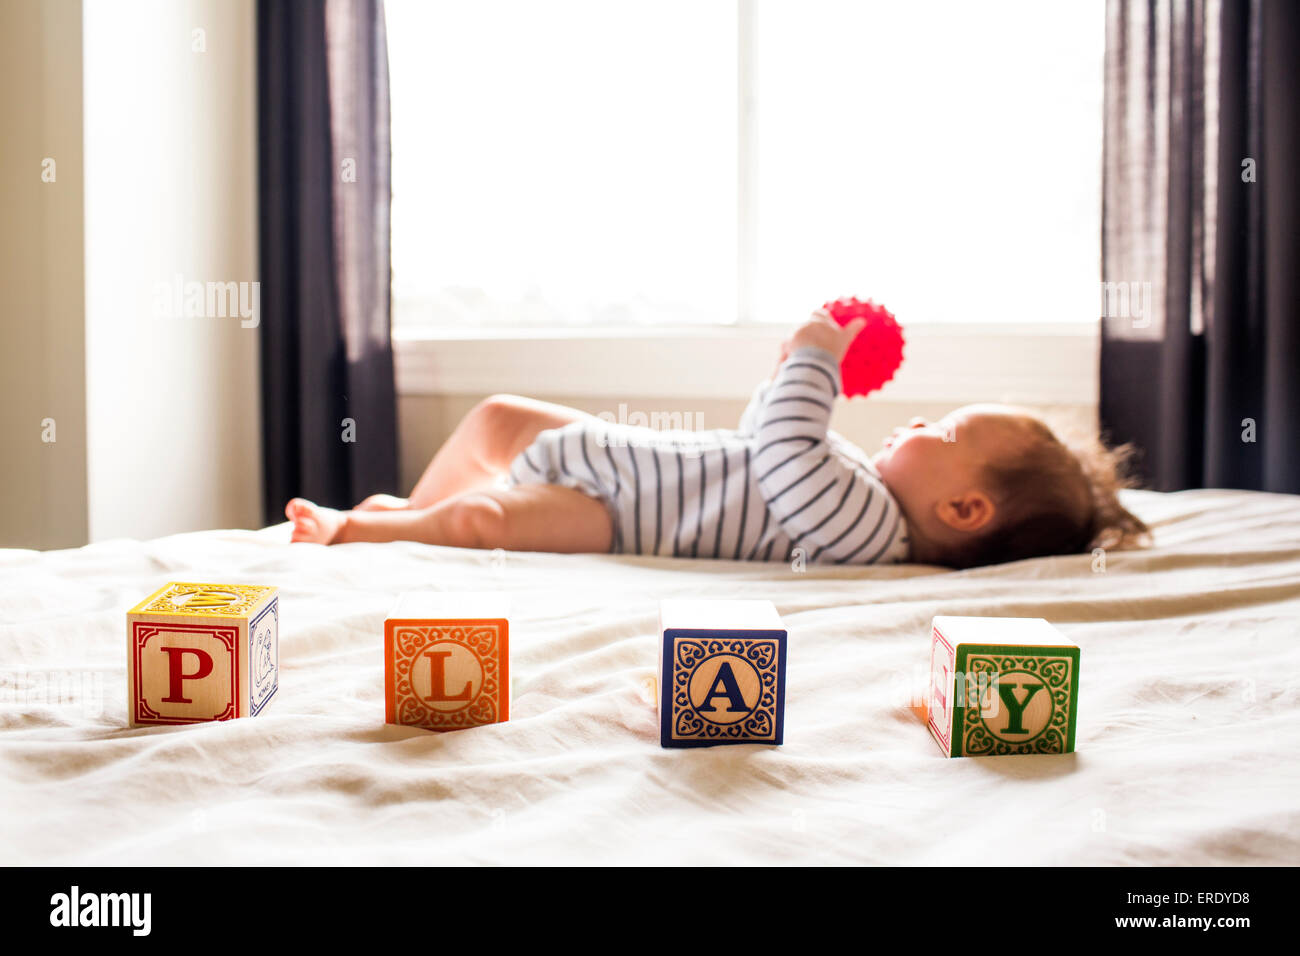 Caucasian baby girl playing on bed Banque D'Images